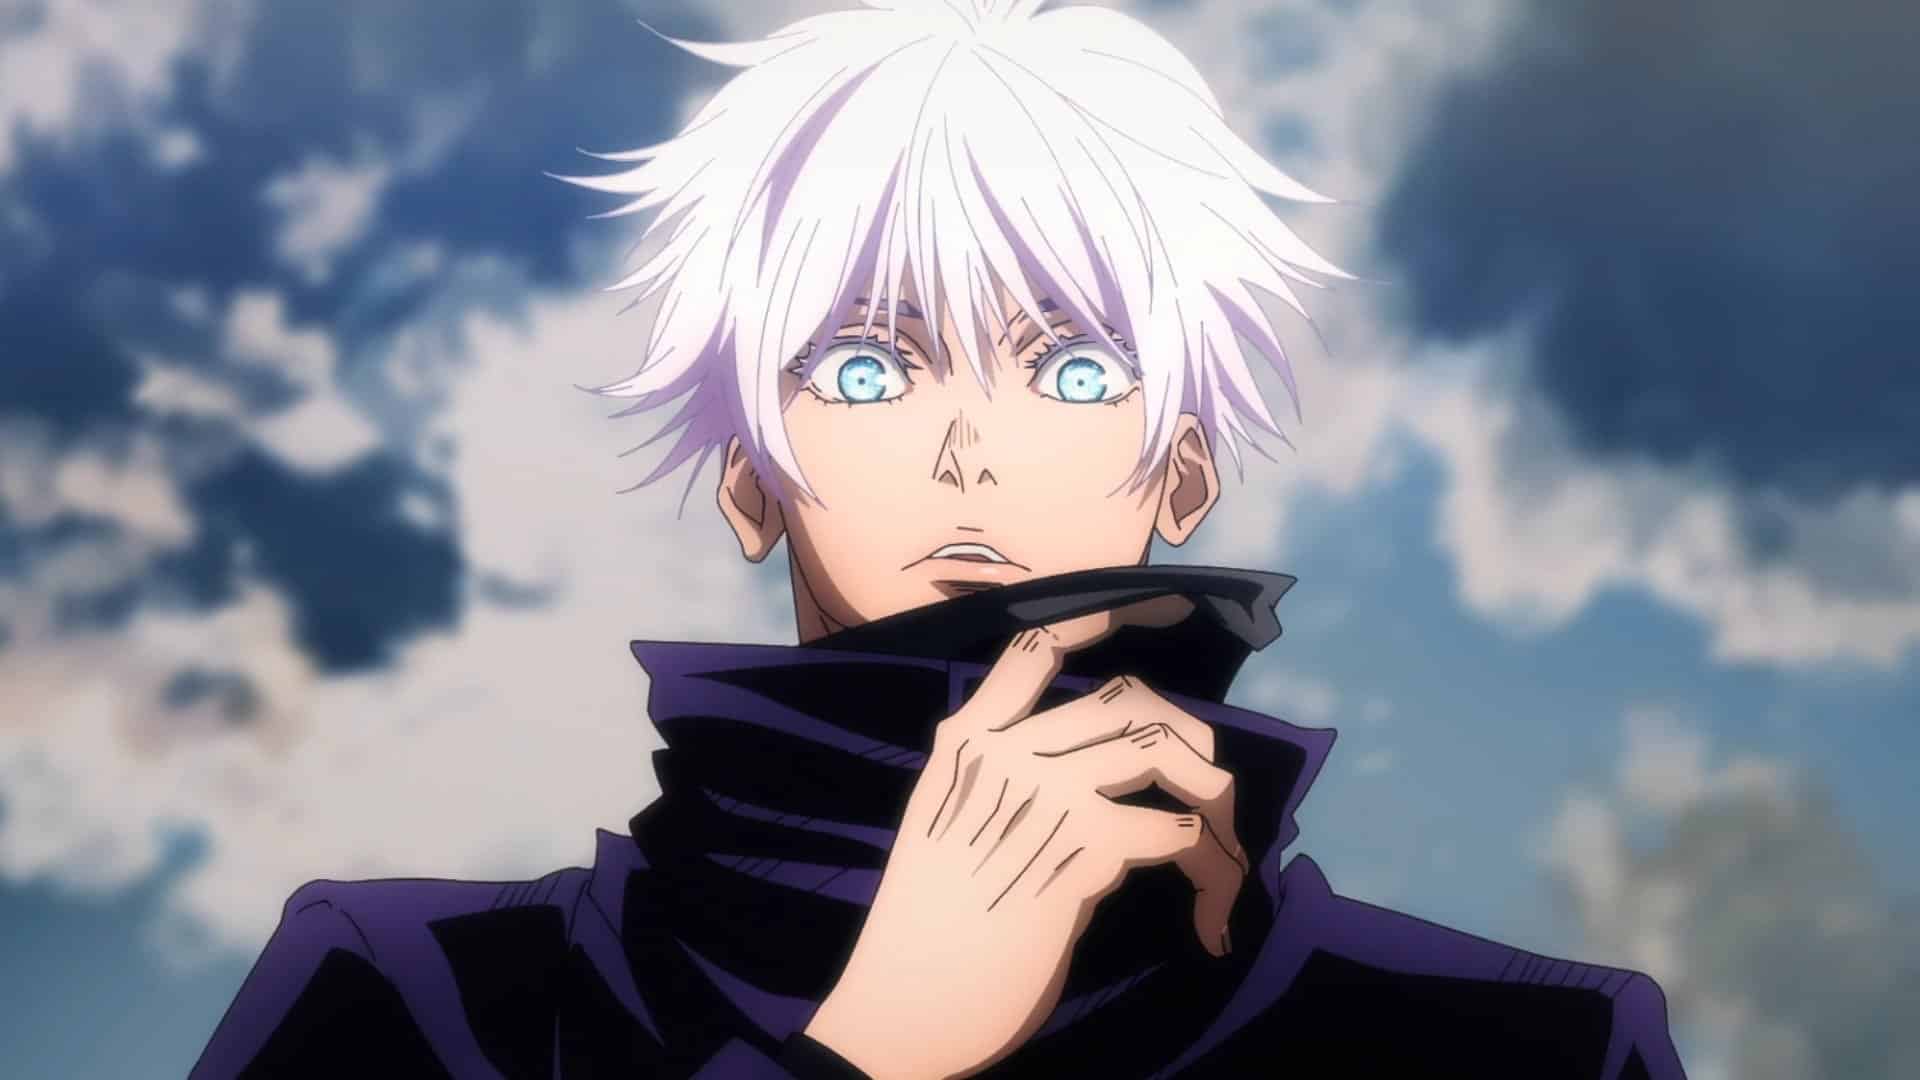 Top 10 Best Anime Boys With White Hair Ranked